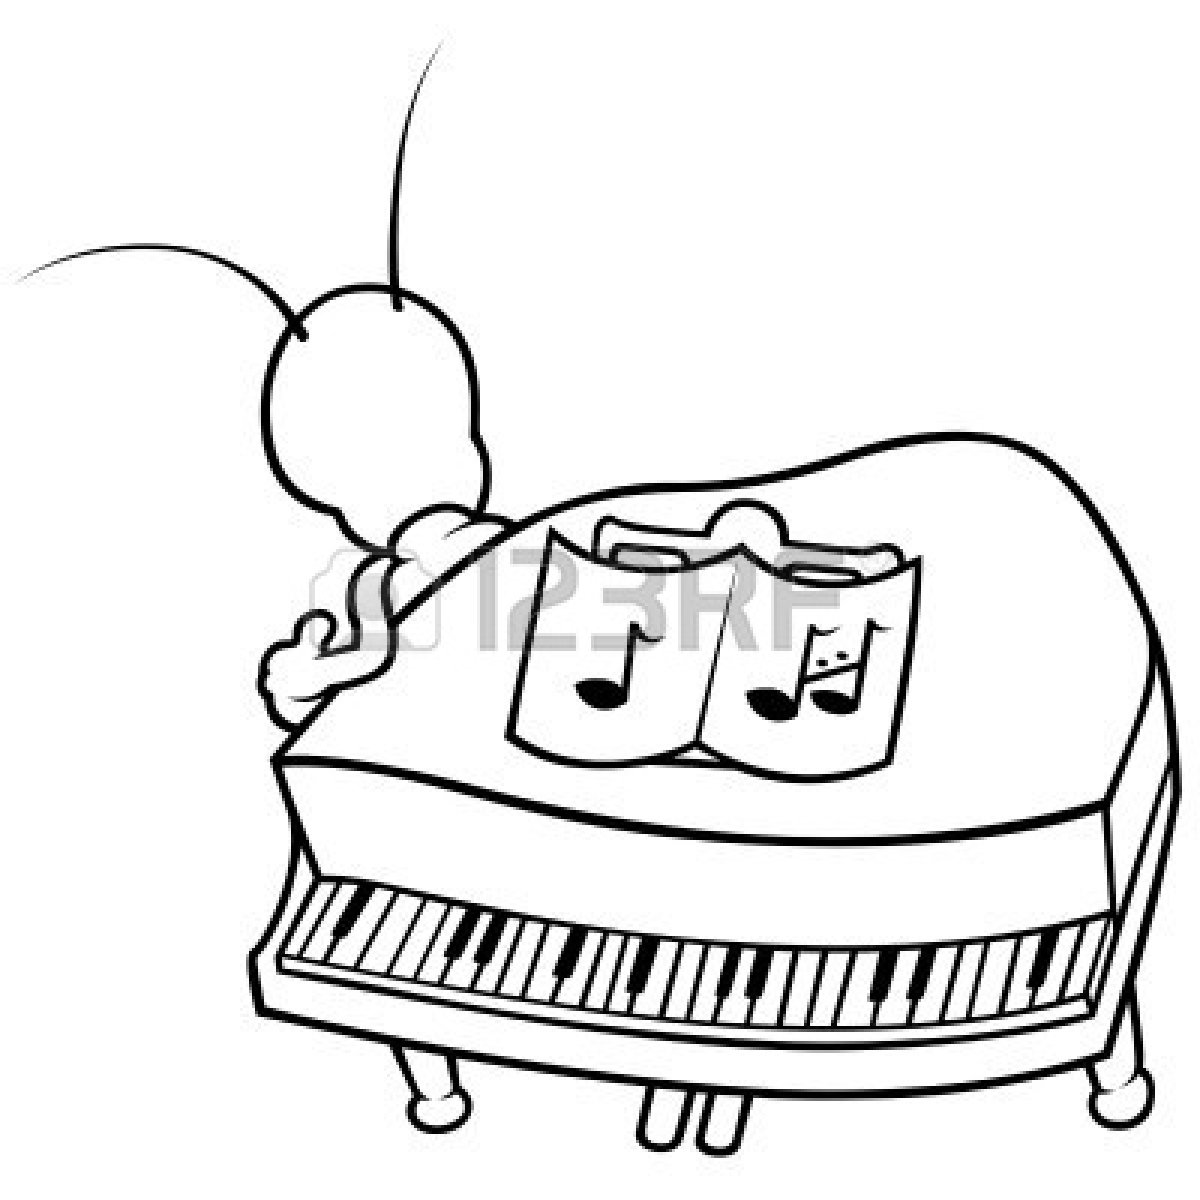 Piano Keyboard Clipart Black And White 8669844 Bug And Piano  Black